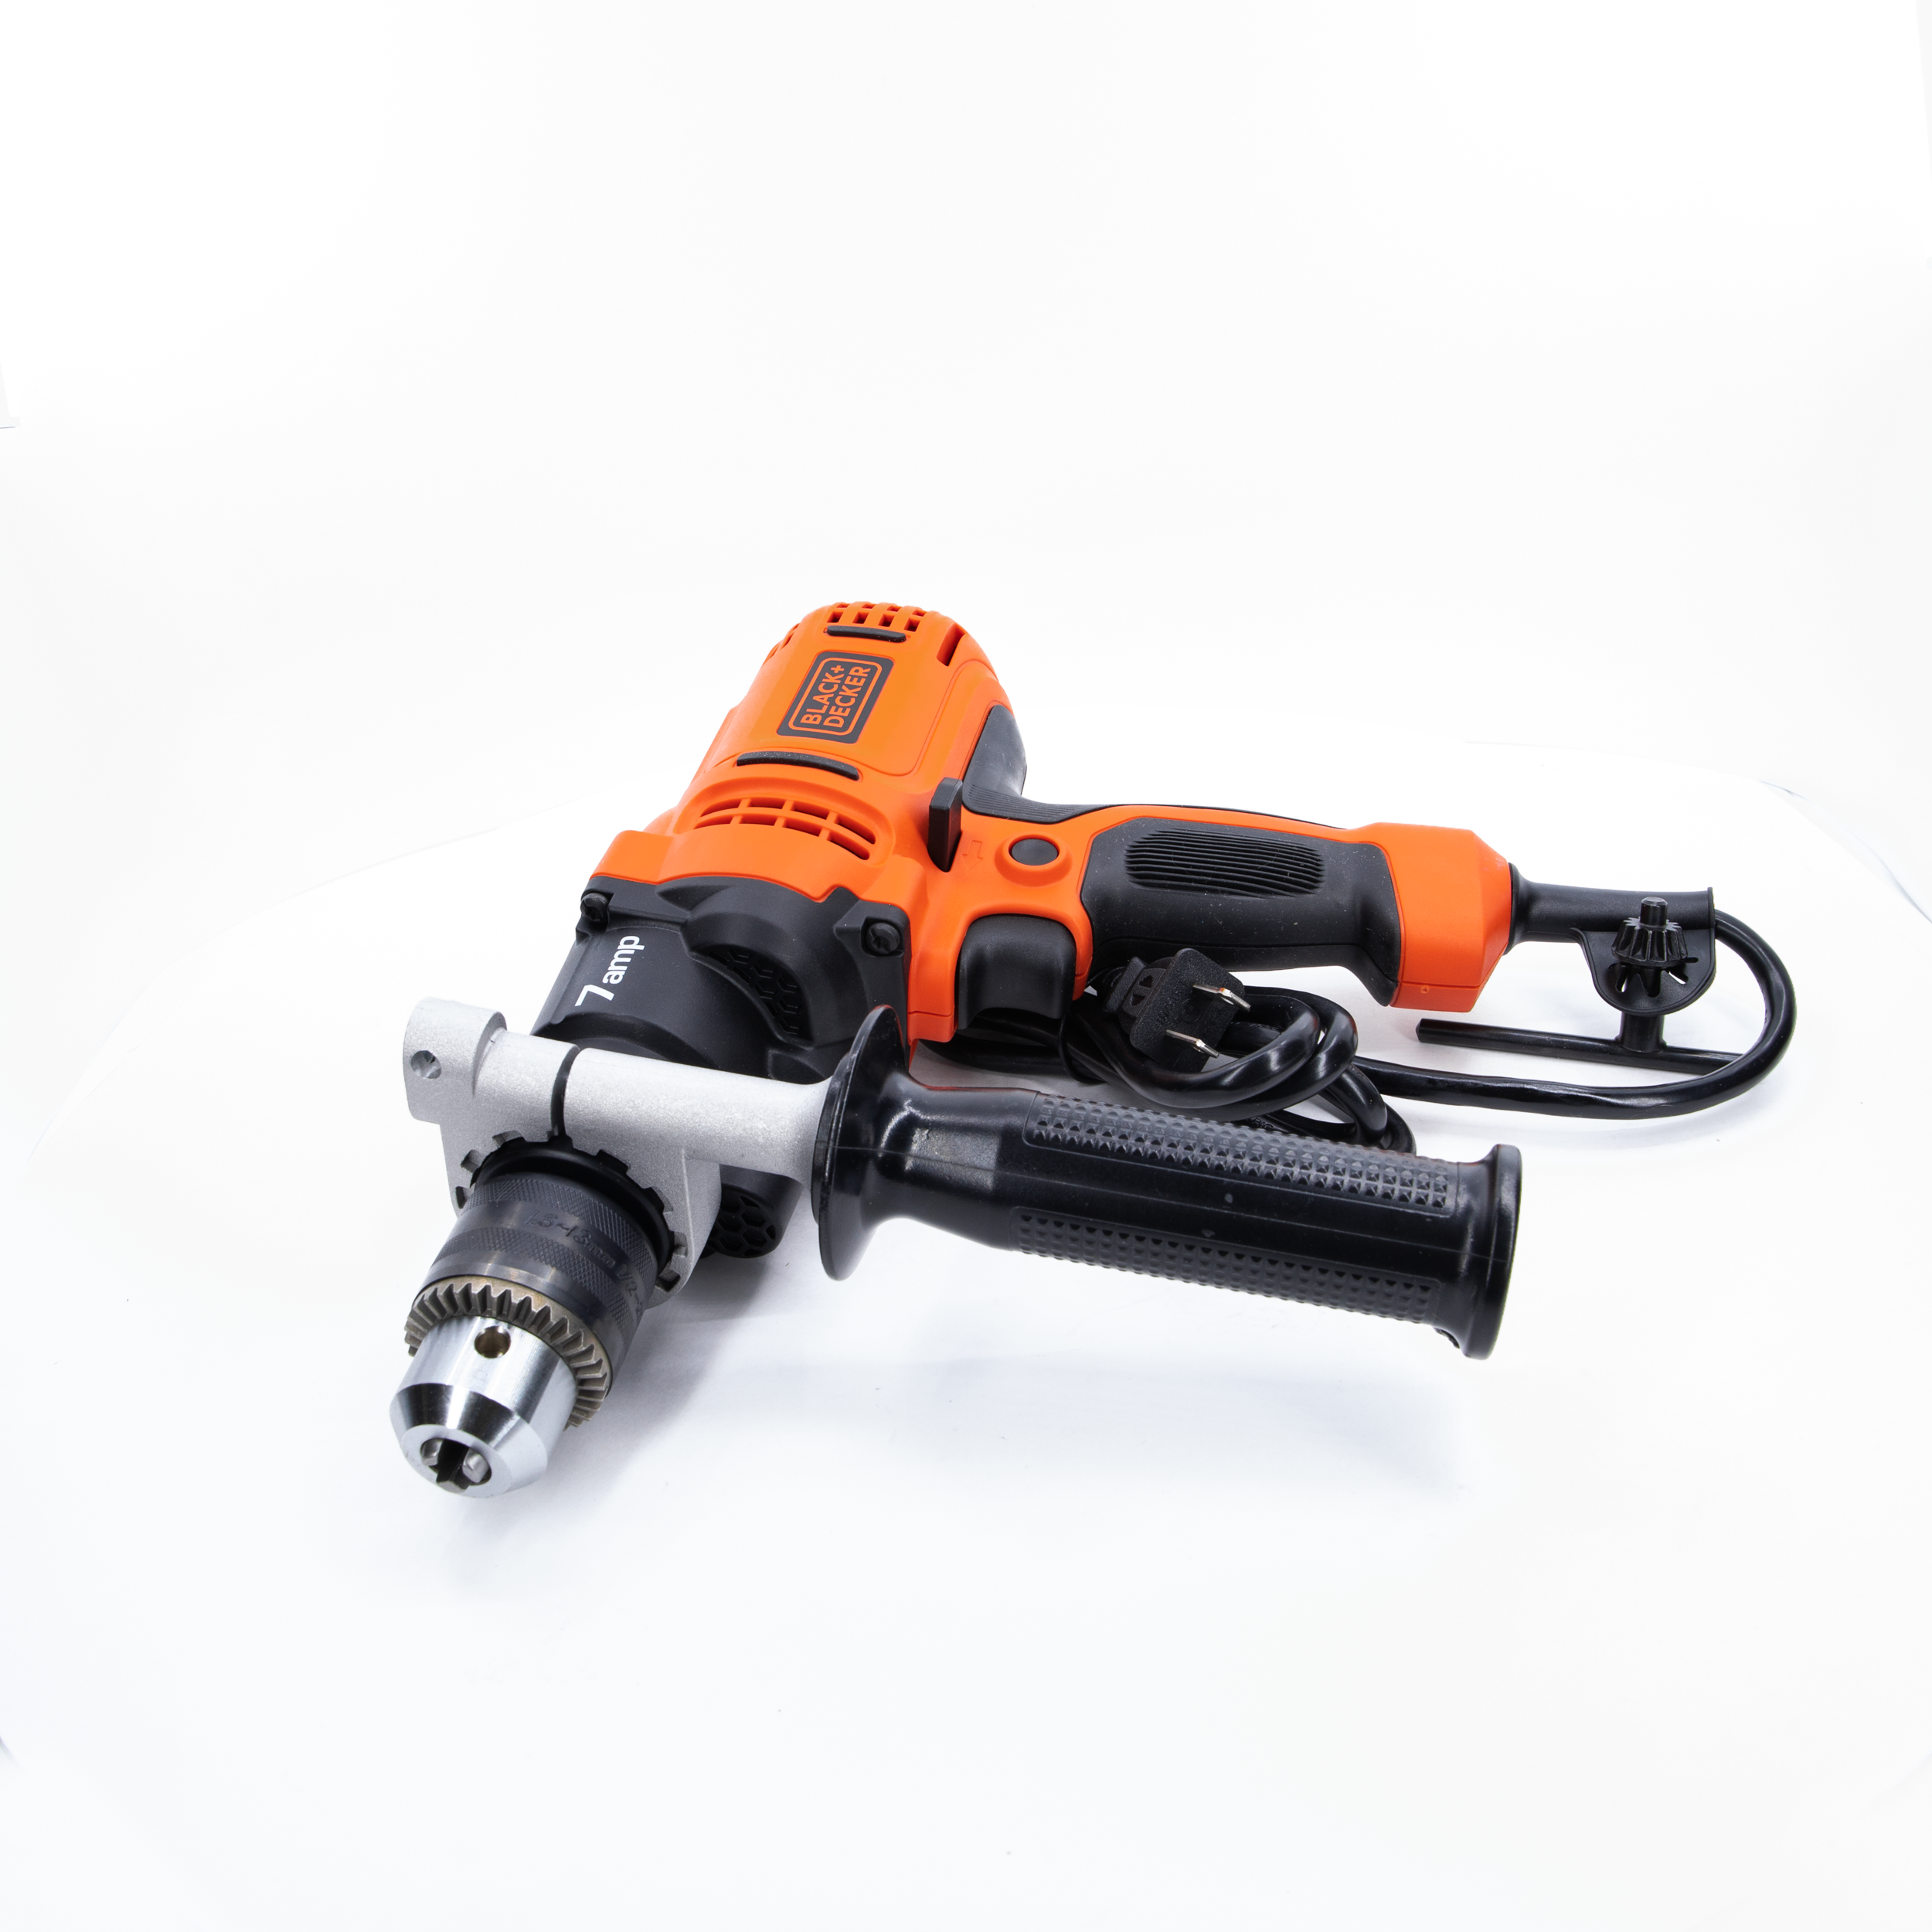  BLACK+DECKER 7.0 Amp 1/2 in. Electric Drill/Driver Kit (DR560)  : Everything Else